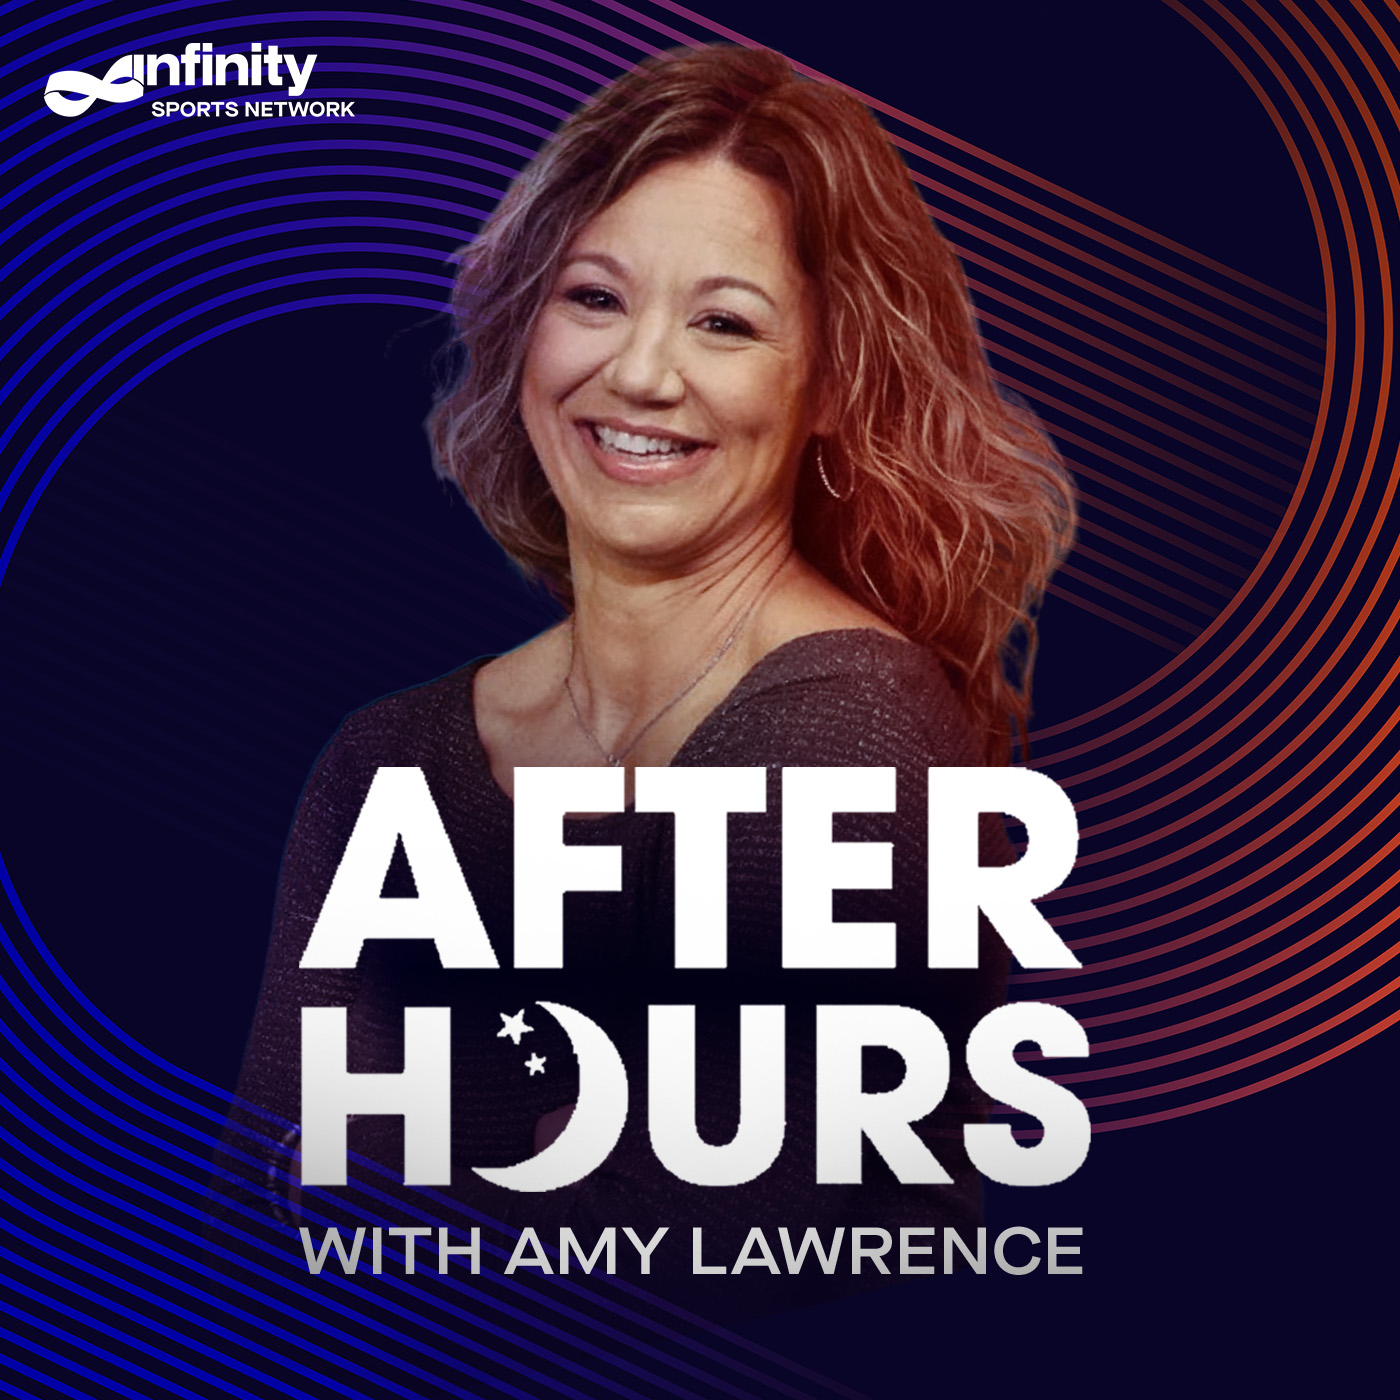 4/7/21 After Hours with Amy Lawrence PODCAST: Hour 4